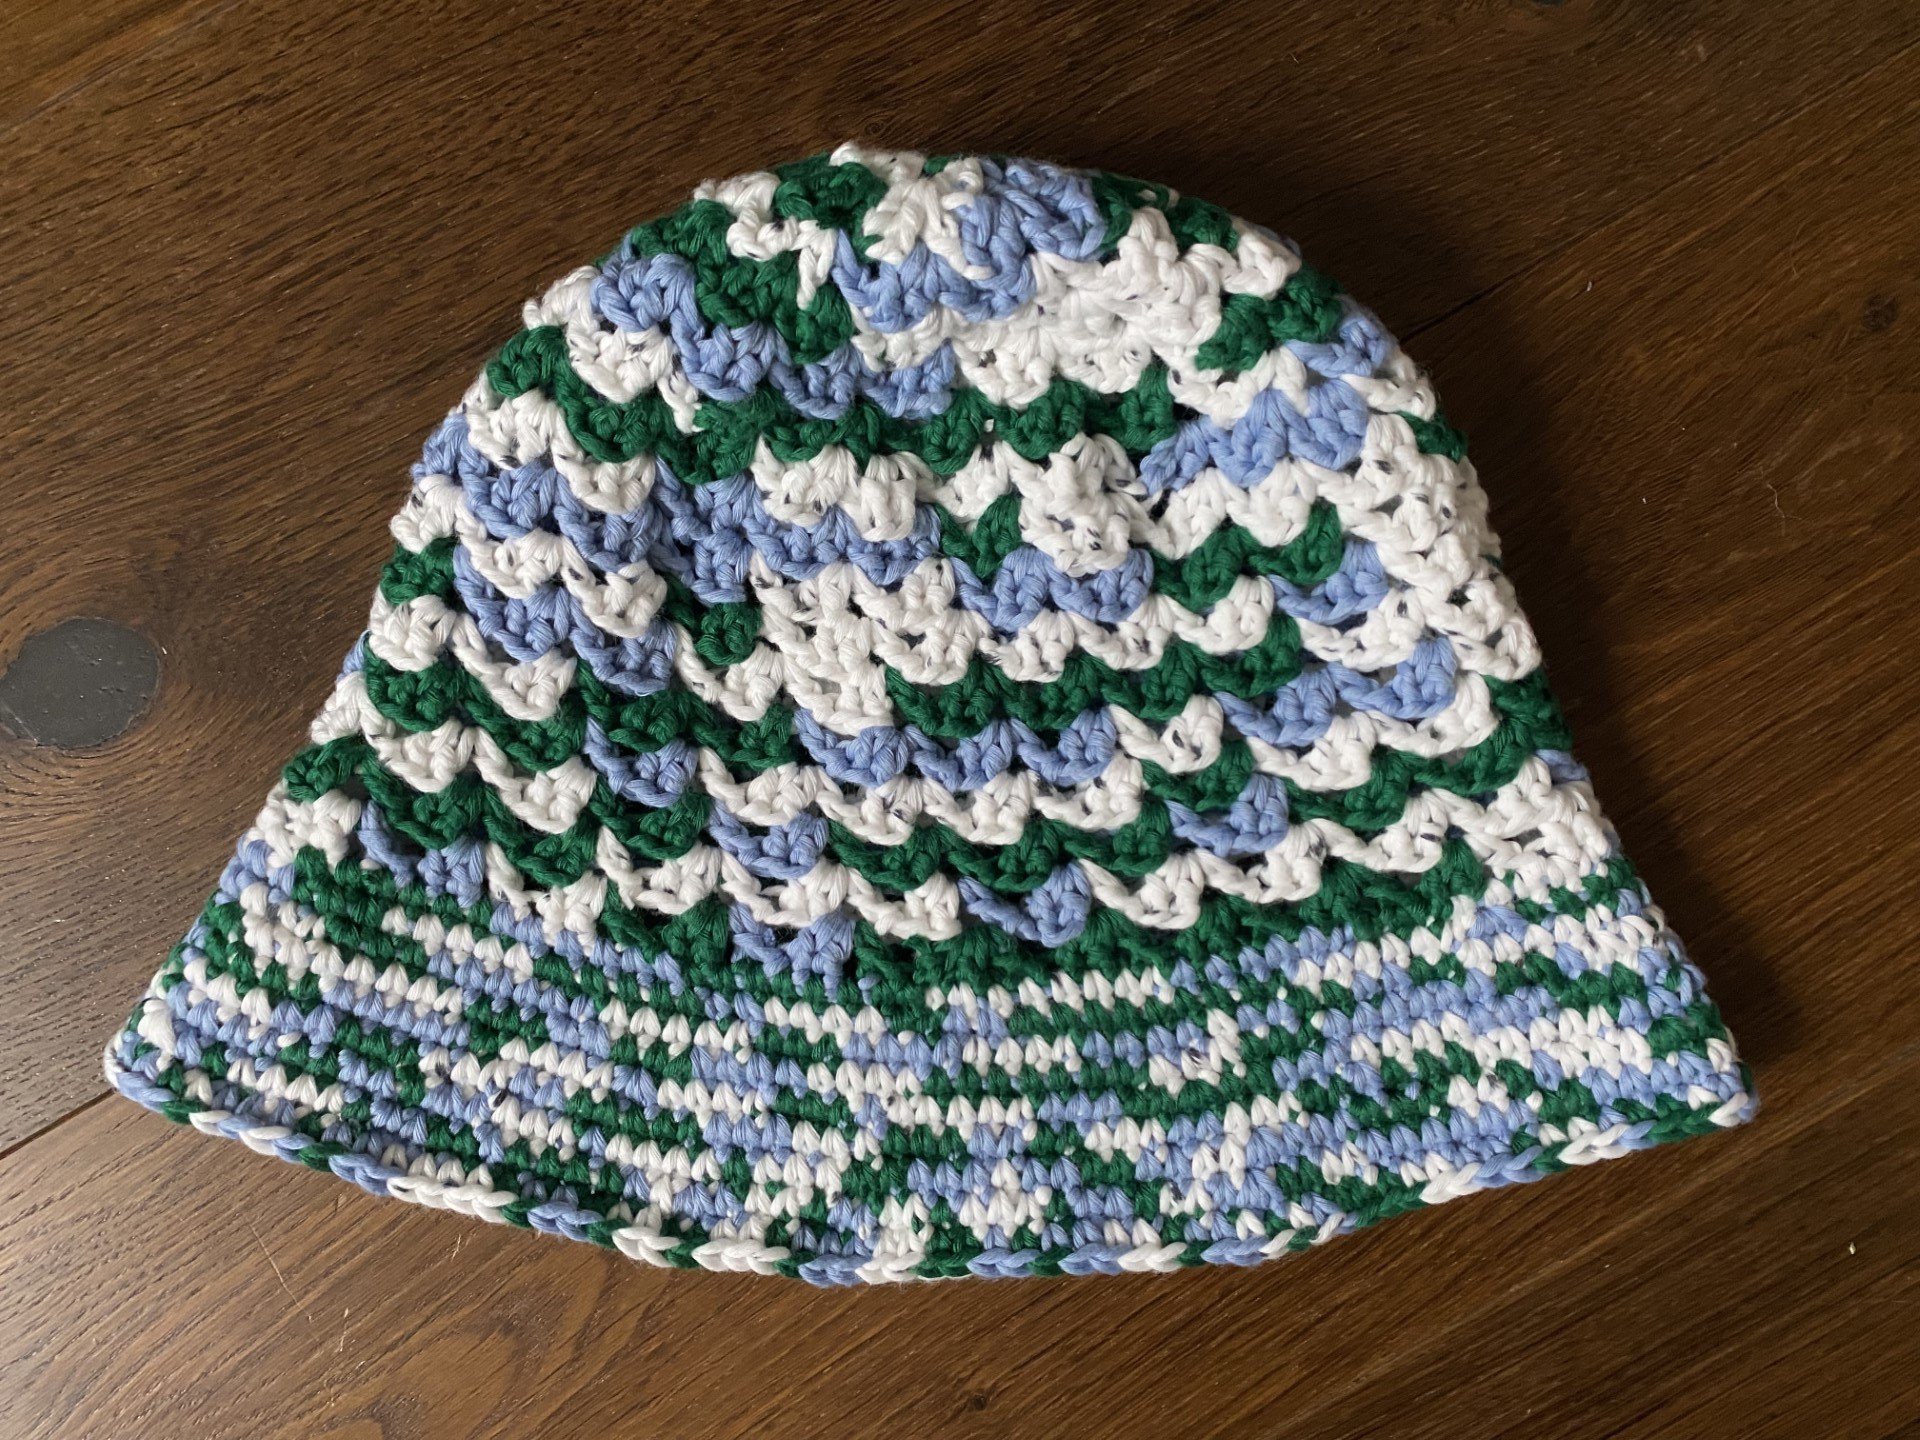  Crochet hat for Due Diligence 